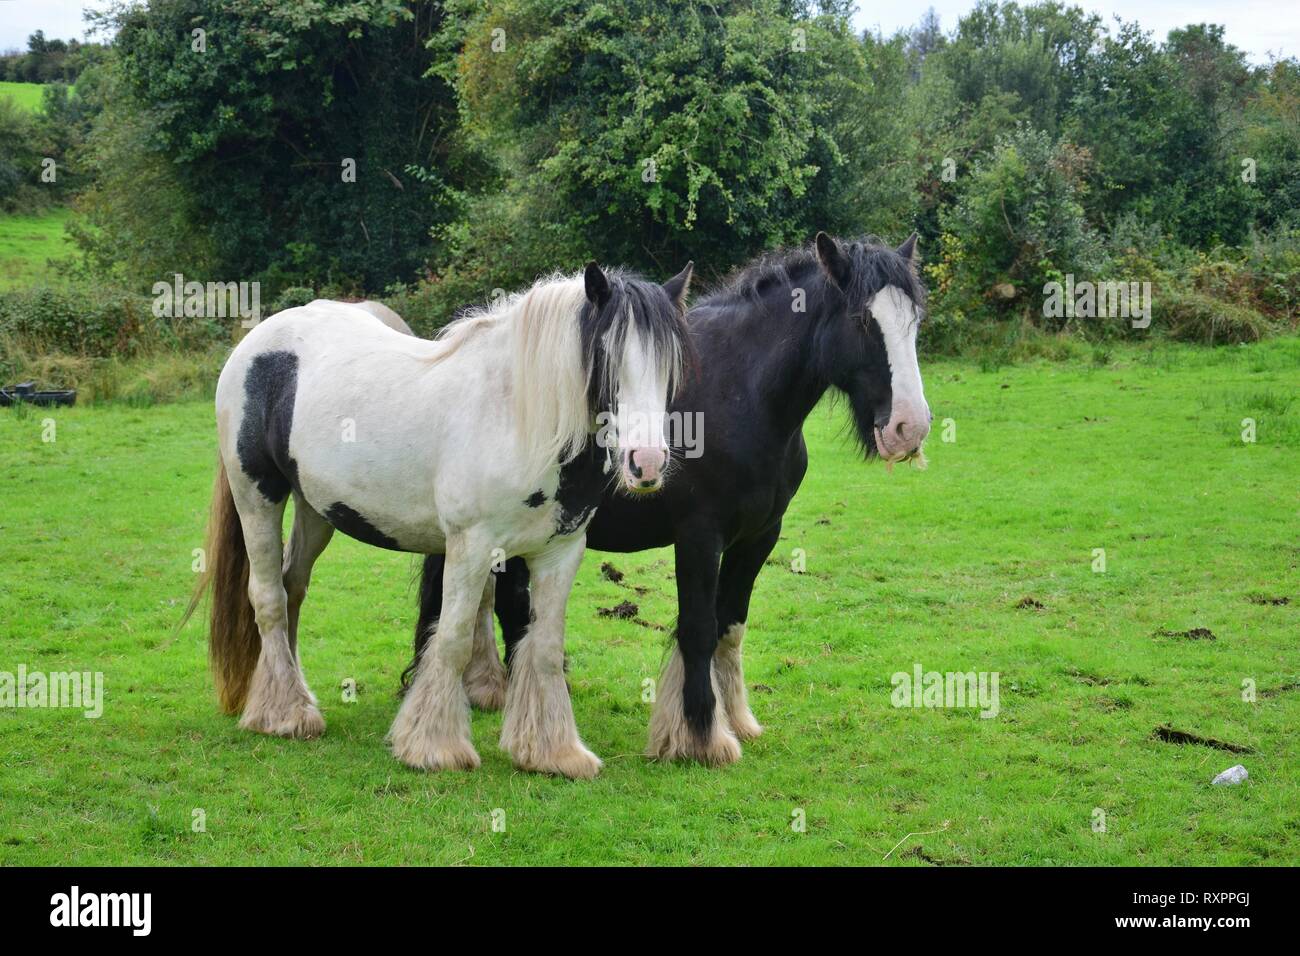 Two Tinker horses in Ireland, one black with a blaze and one piebald white-black. The black one has a little beard. Stock Photo